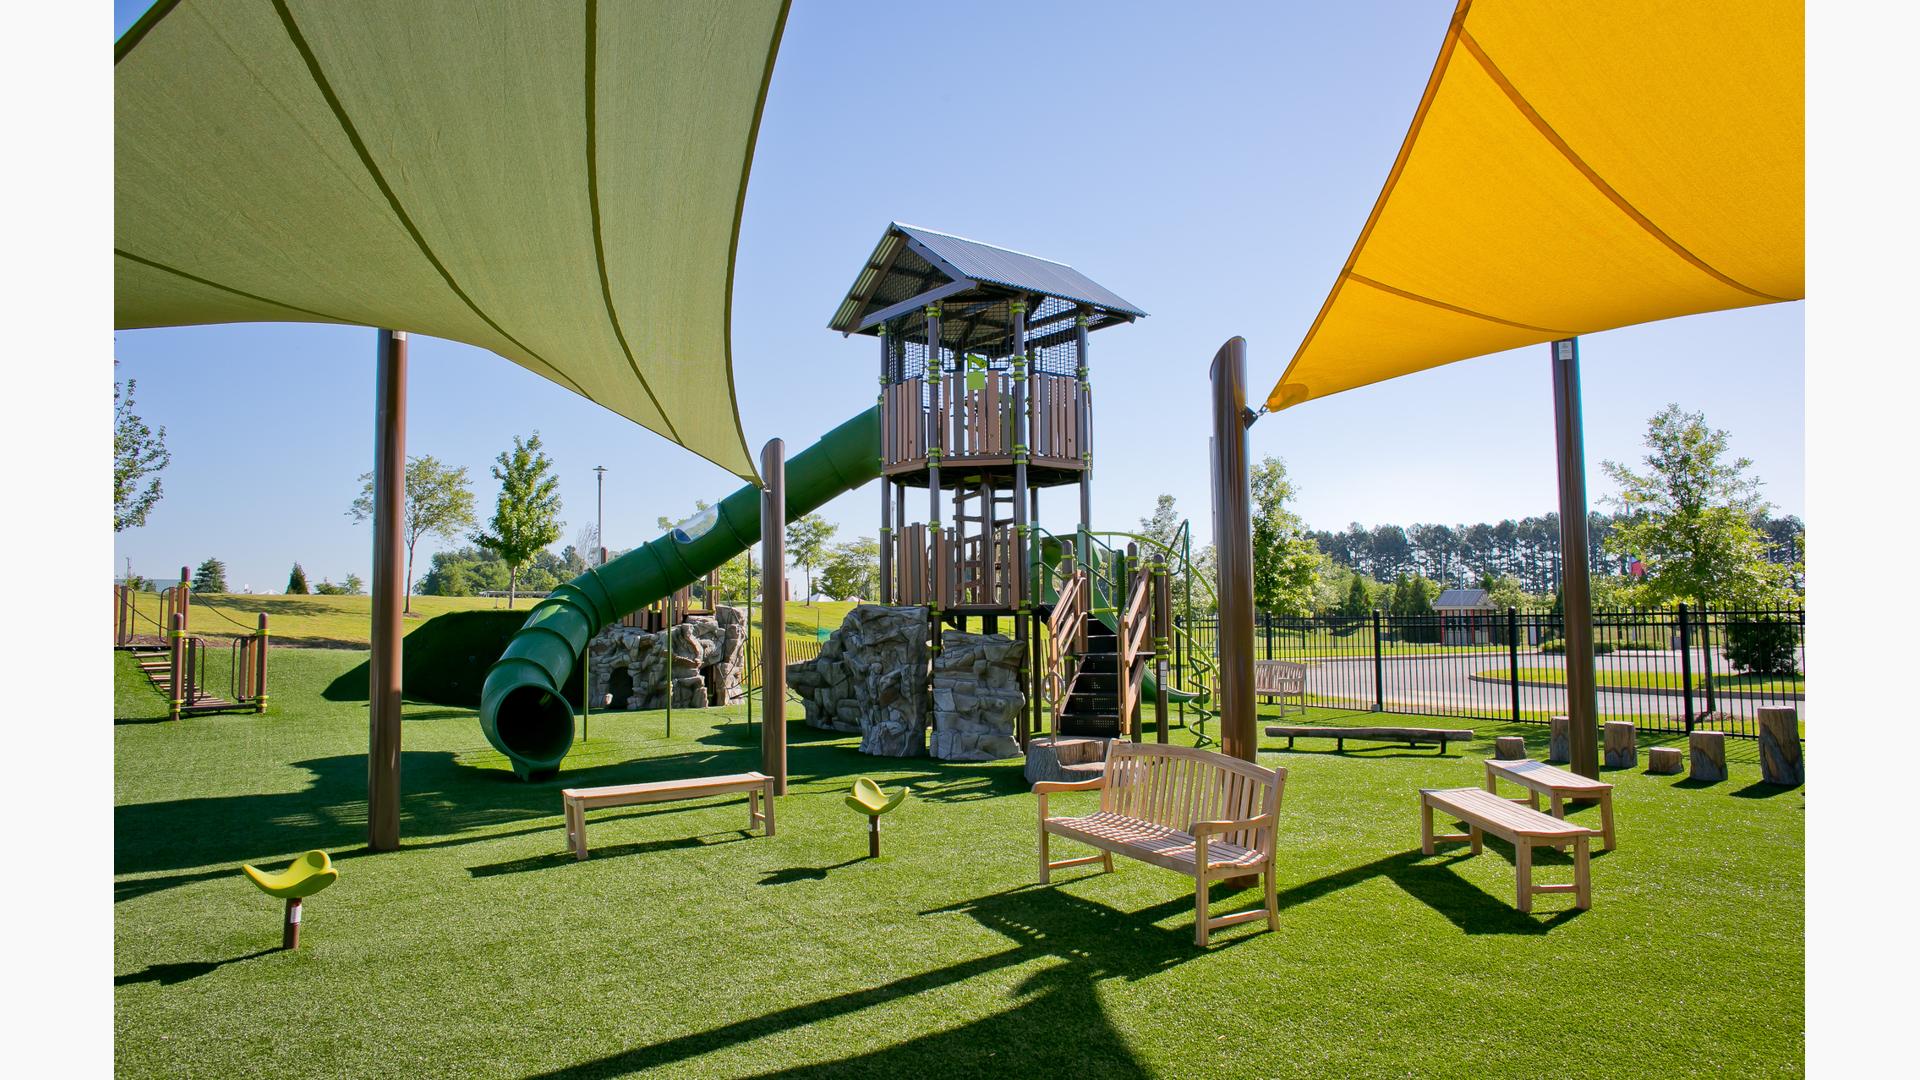 The PlayOdyssey® Tower at Discovery Park of America for age 5 to 12. Playground features a double bay ZipKrooz®, Rhapsody® Outdoor Musical Instruments, and SkyWays® shade.